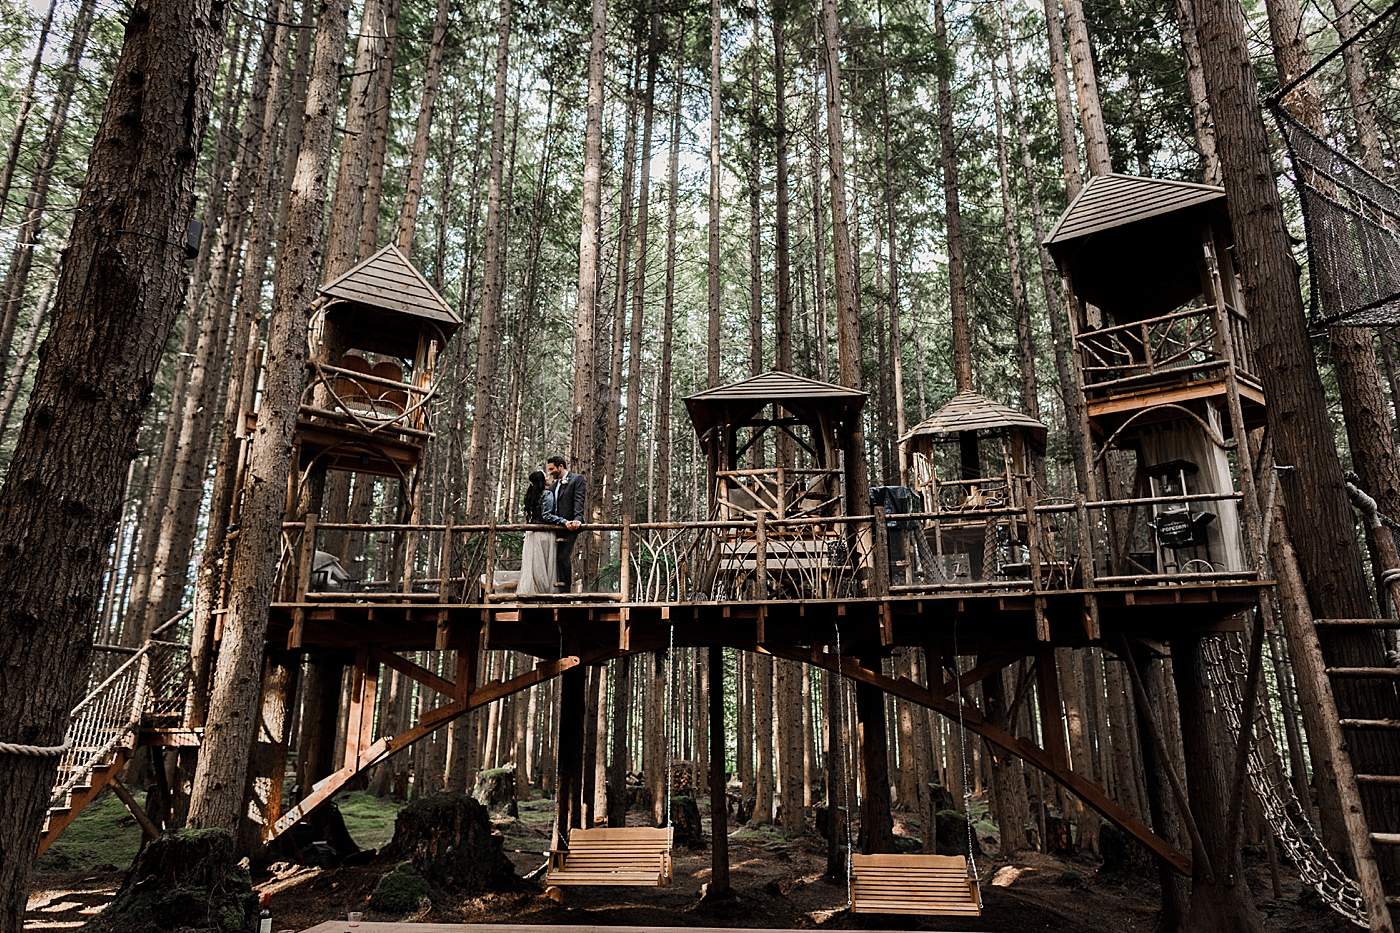 Treehouse wedding at The Emerald Forest | Megan Montalvo Photography